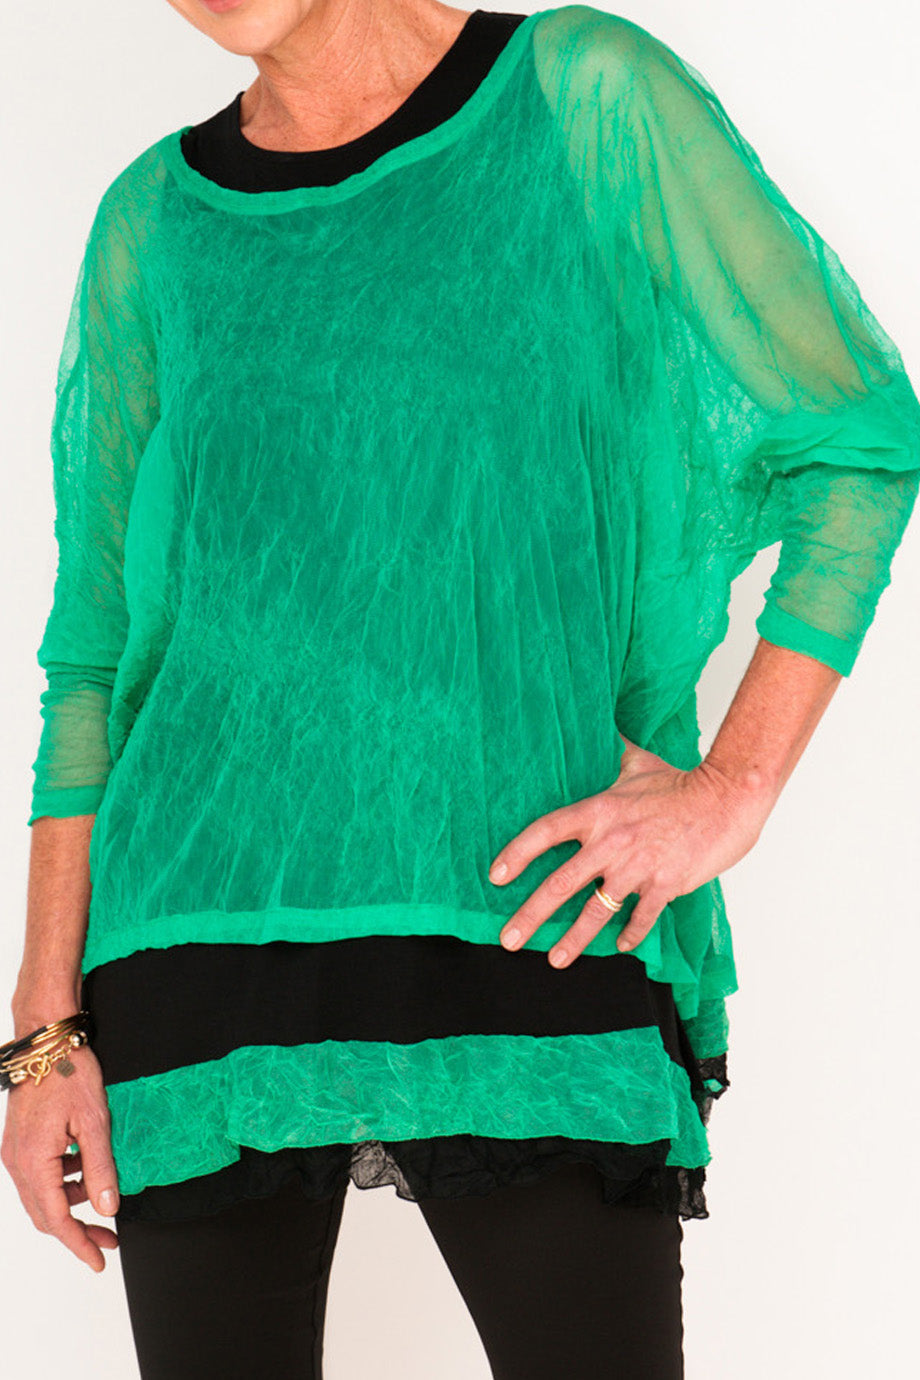 Donna Mesh Boxy Top - Emerald - One Size